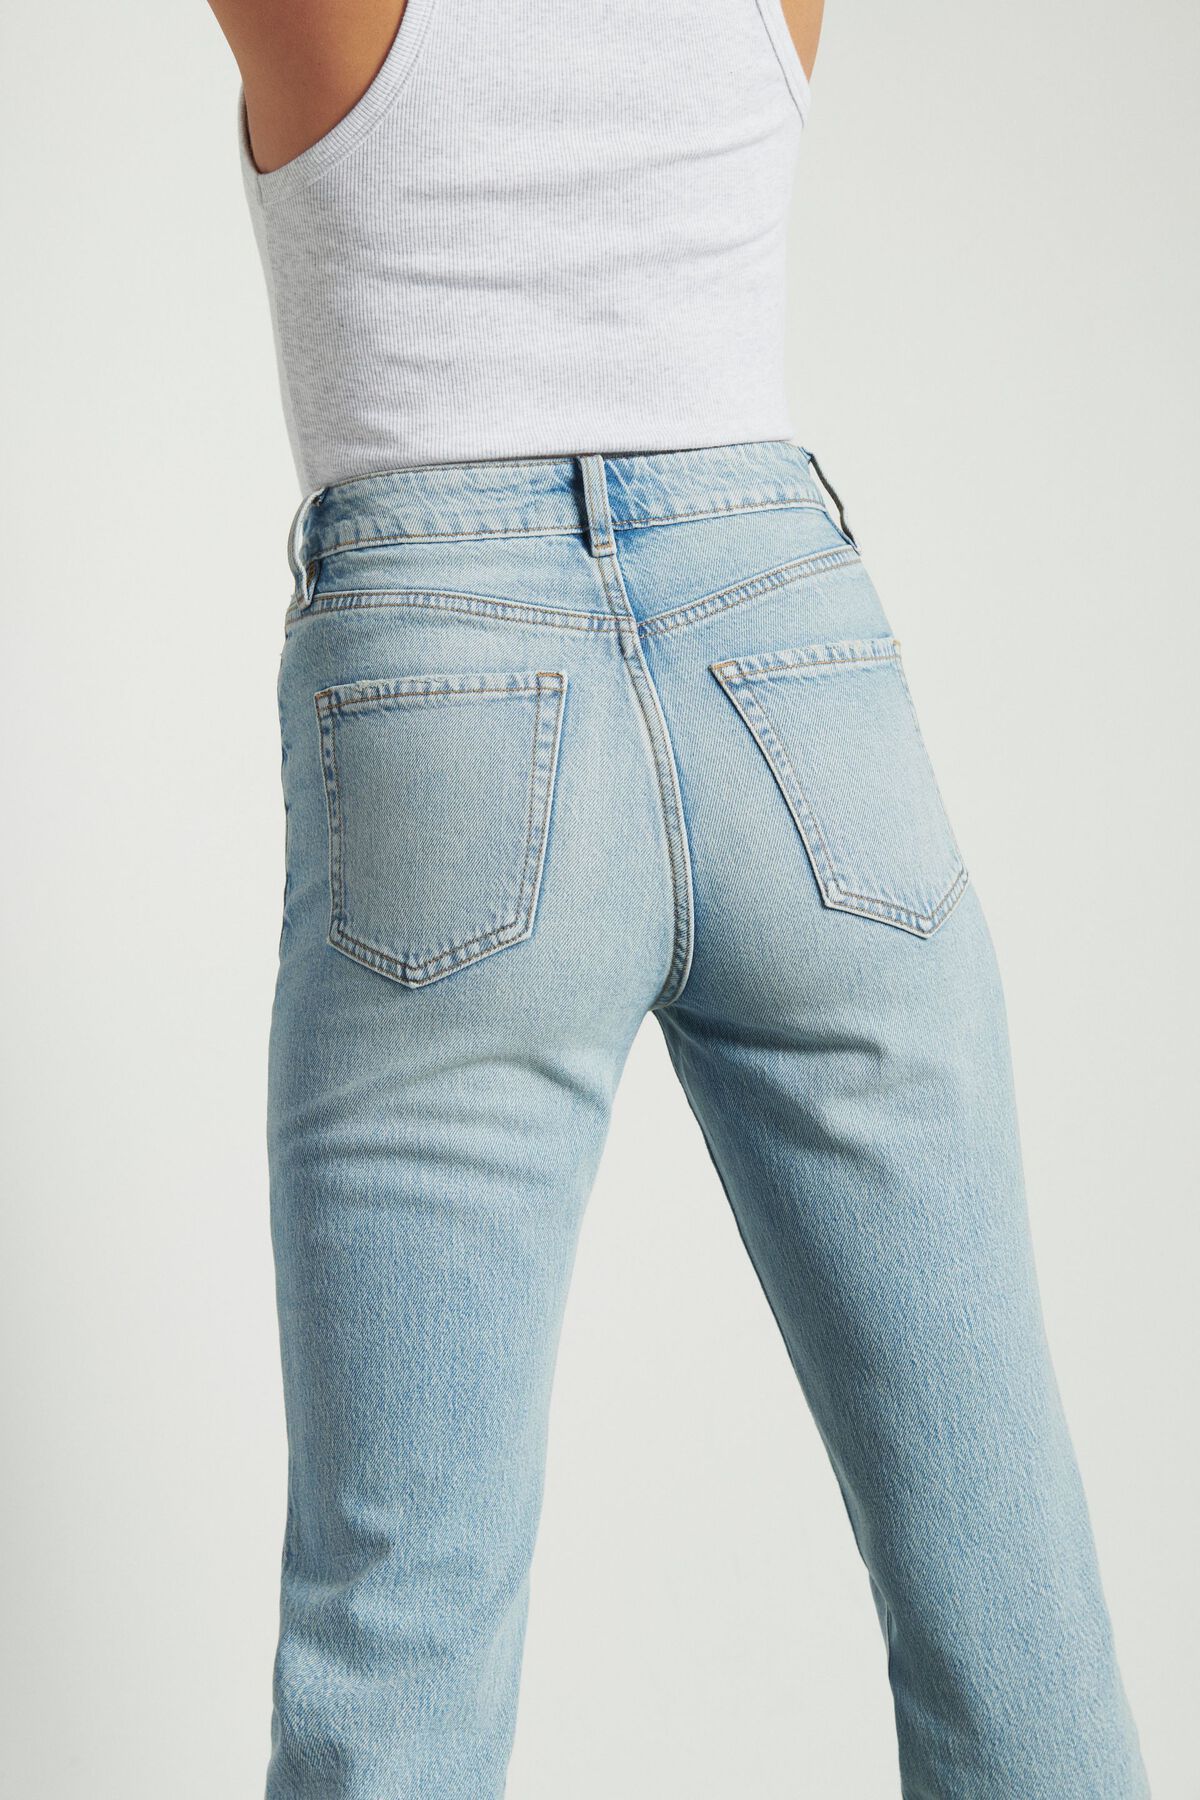 Dynamite Candice Bootcut Jeans. 7